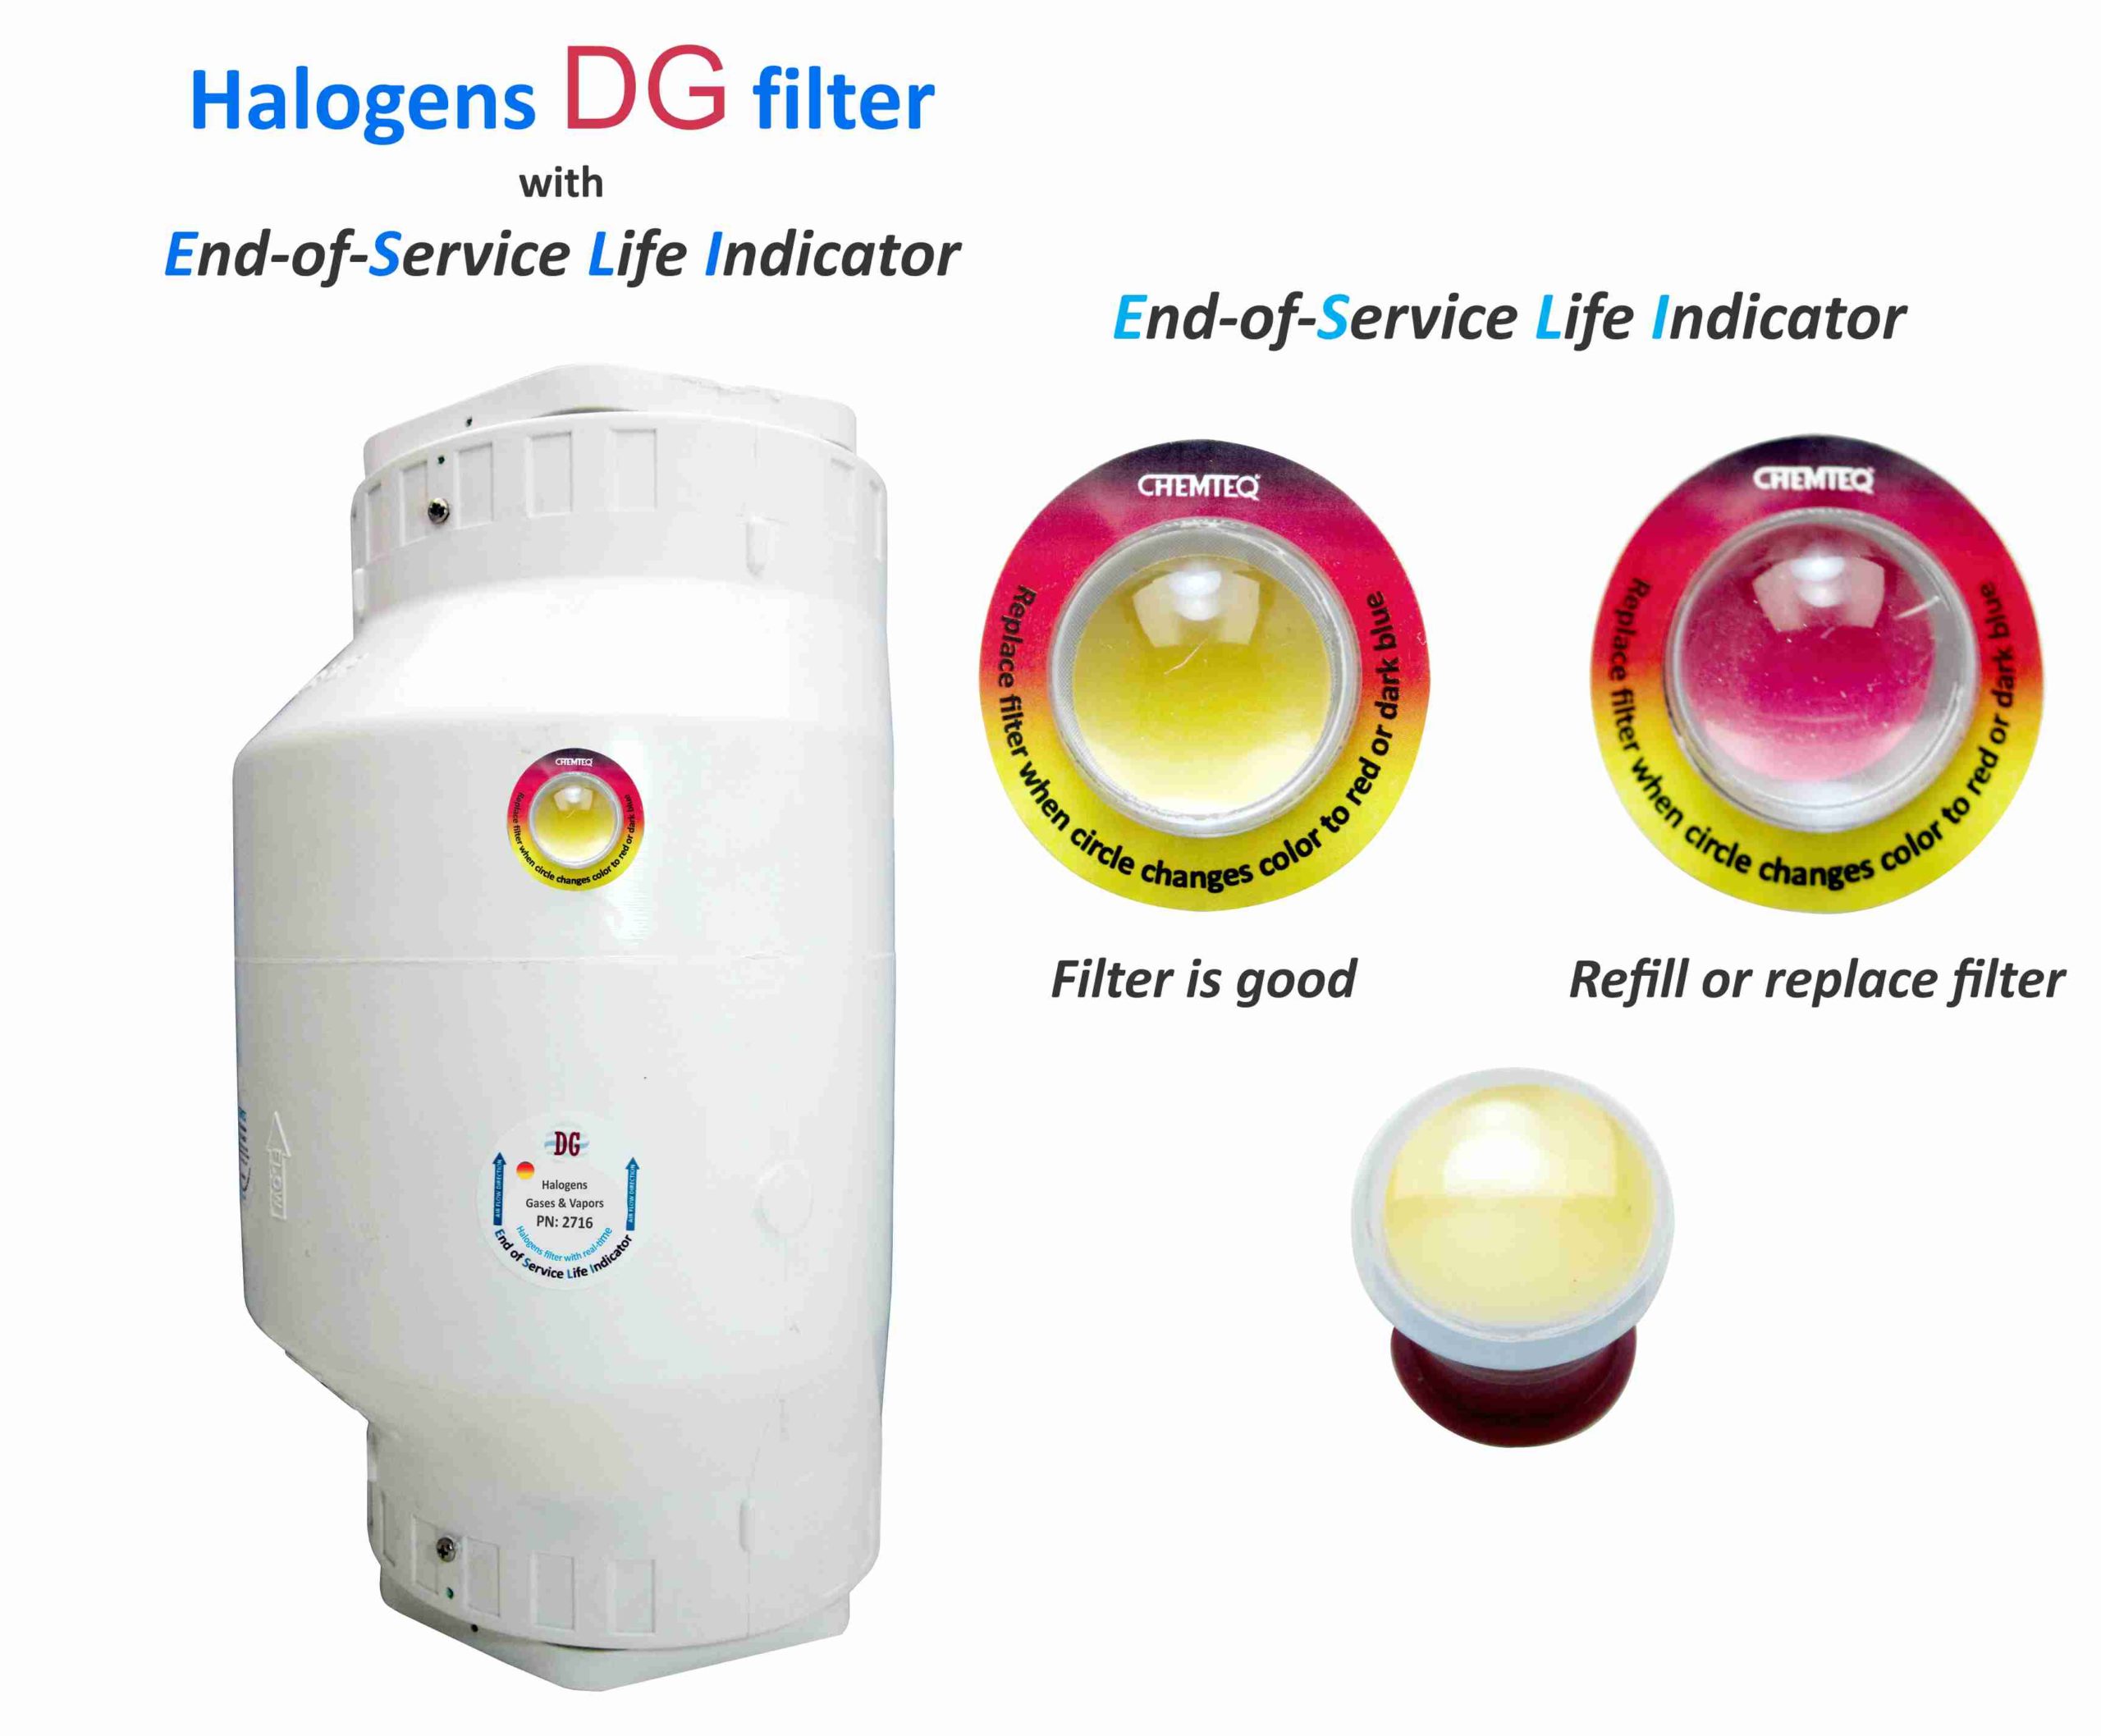 Halogens DG FILTER-ESLI 2717. Halogens include bromine, chlorine and iodine, suitable for chemical processes and reactor vents